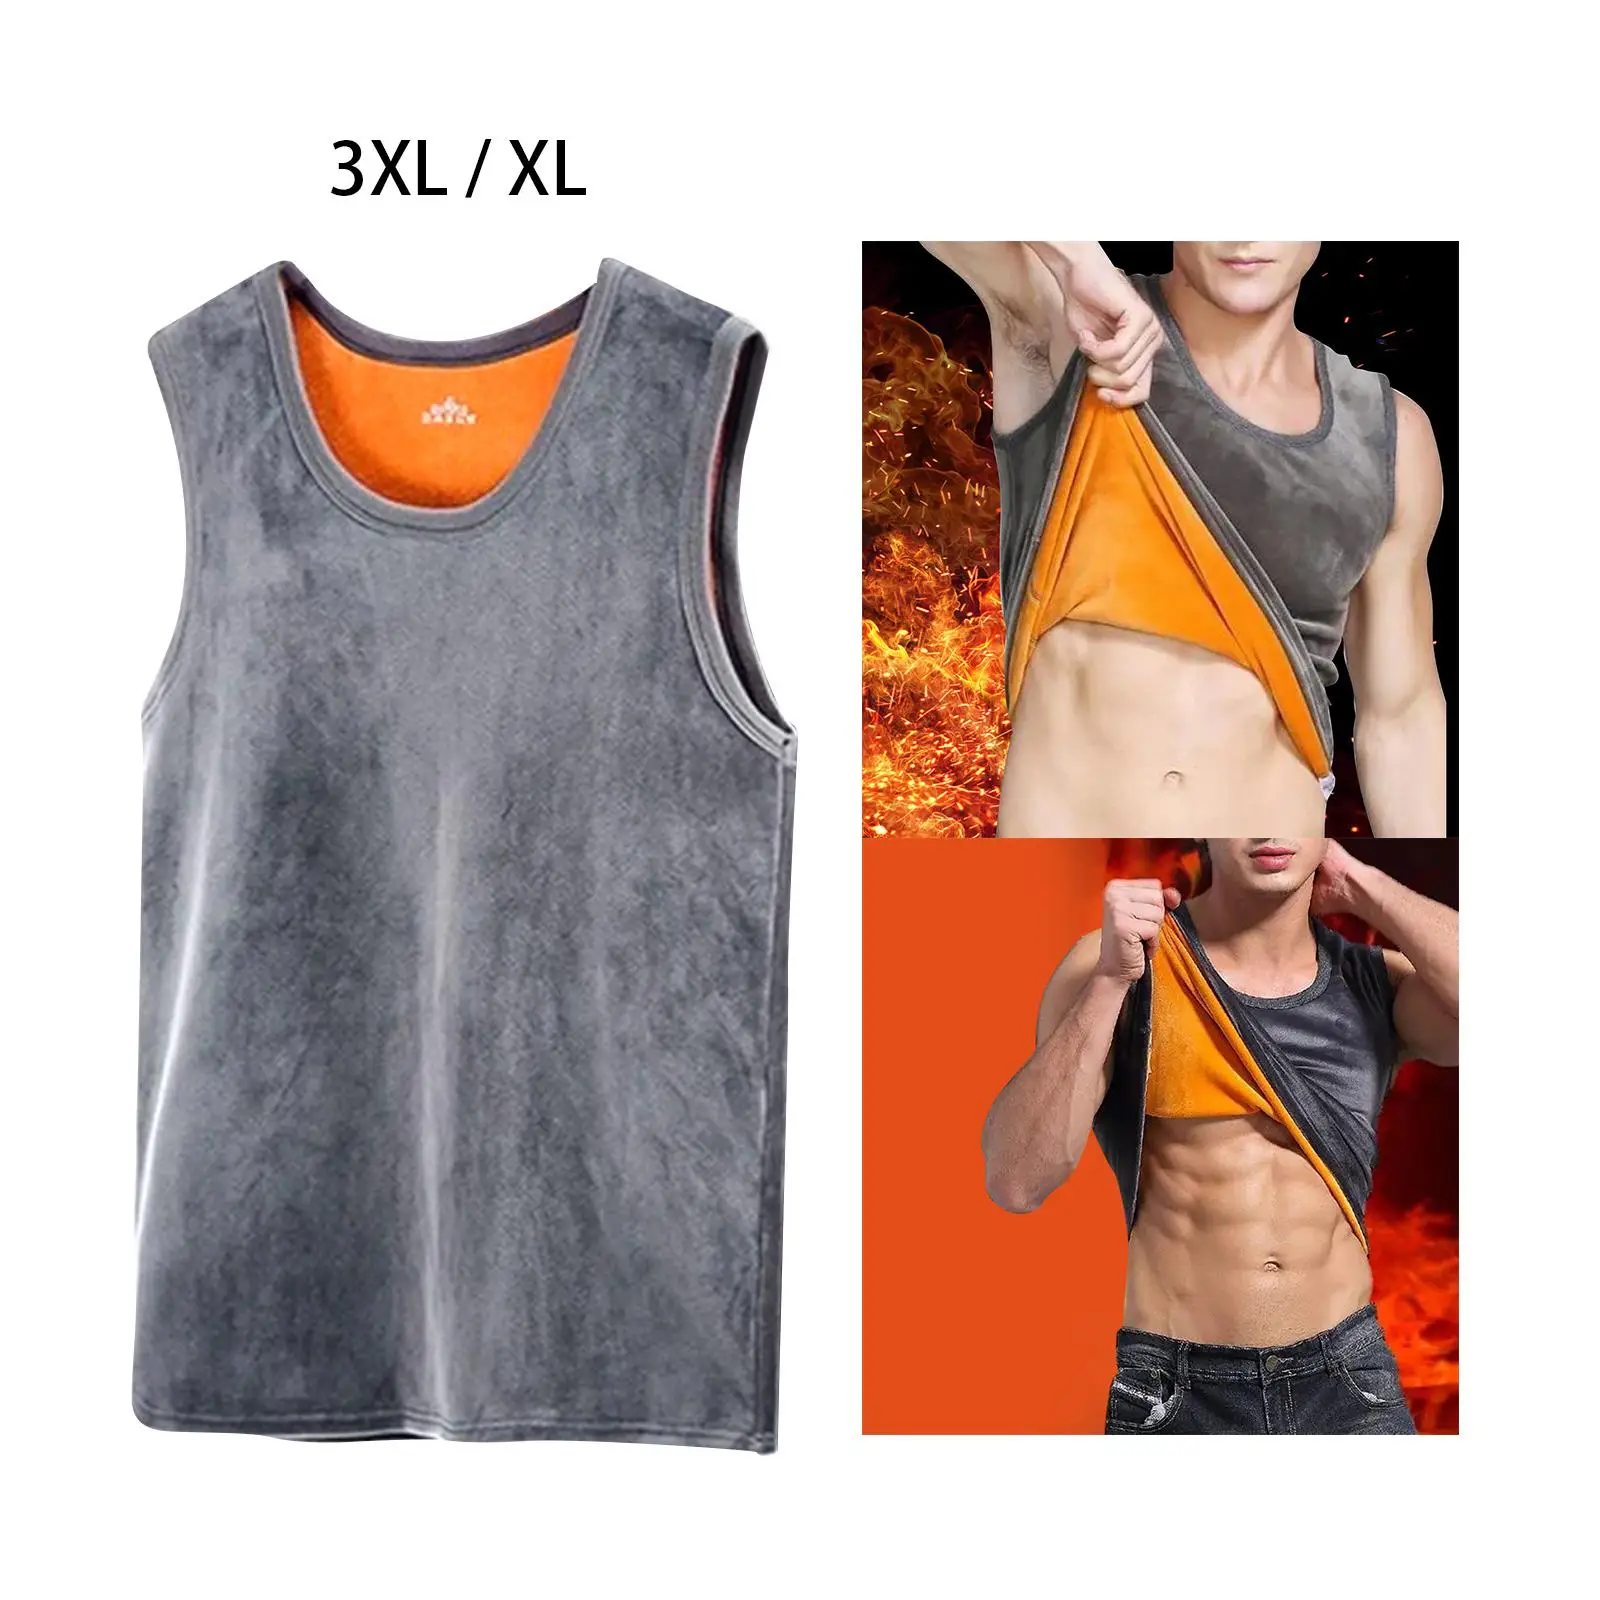 Mens Winter Vest Fleece Lined Comfortable Large Size Seamless Sleeveless Cold Proof Warm Tight Fitting Vest Tank Top